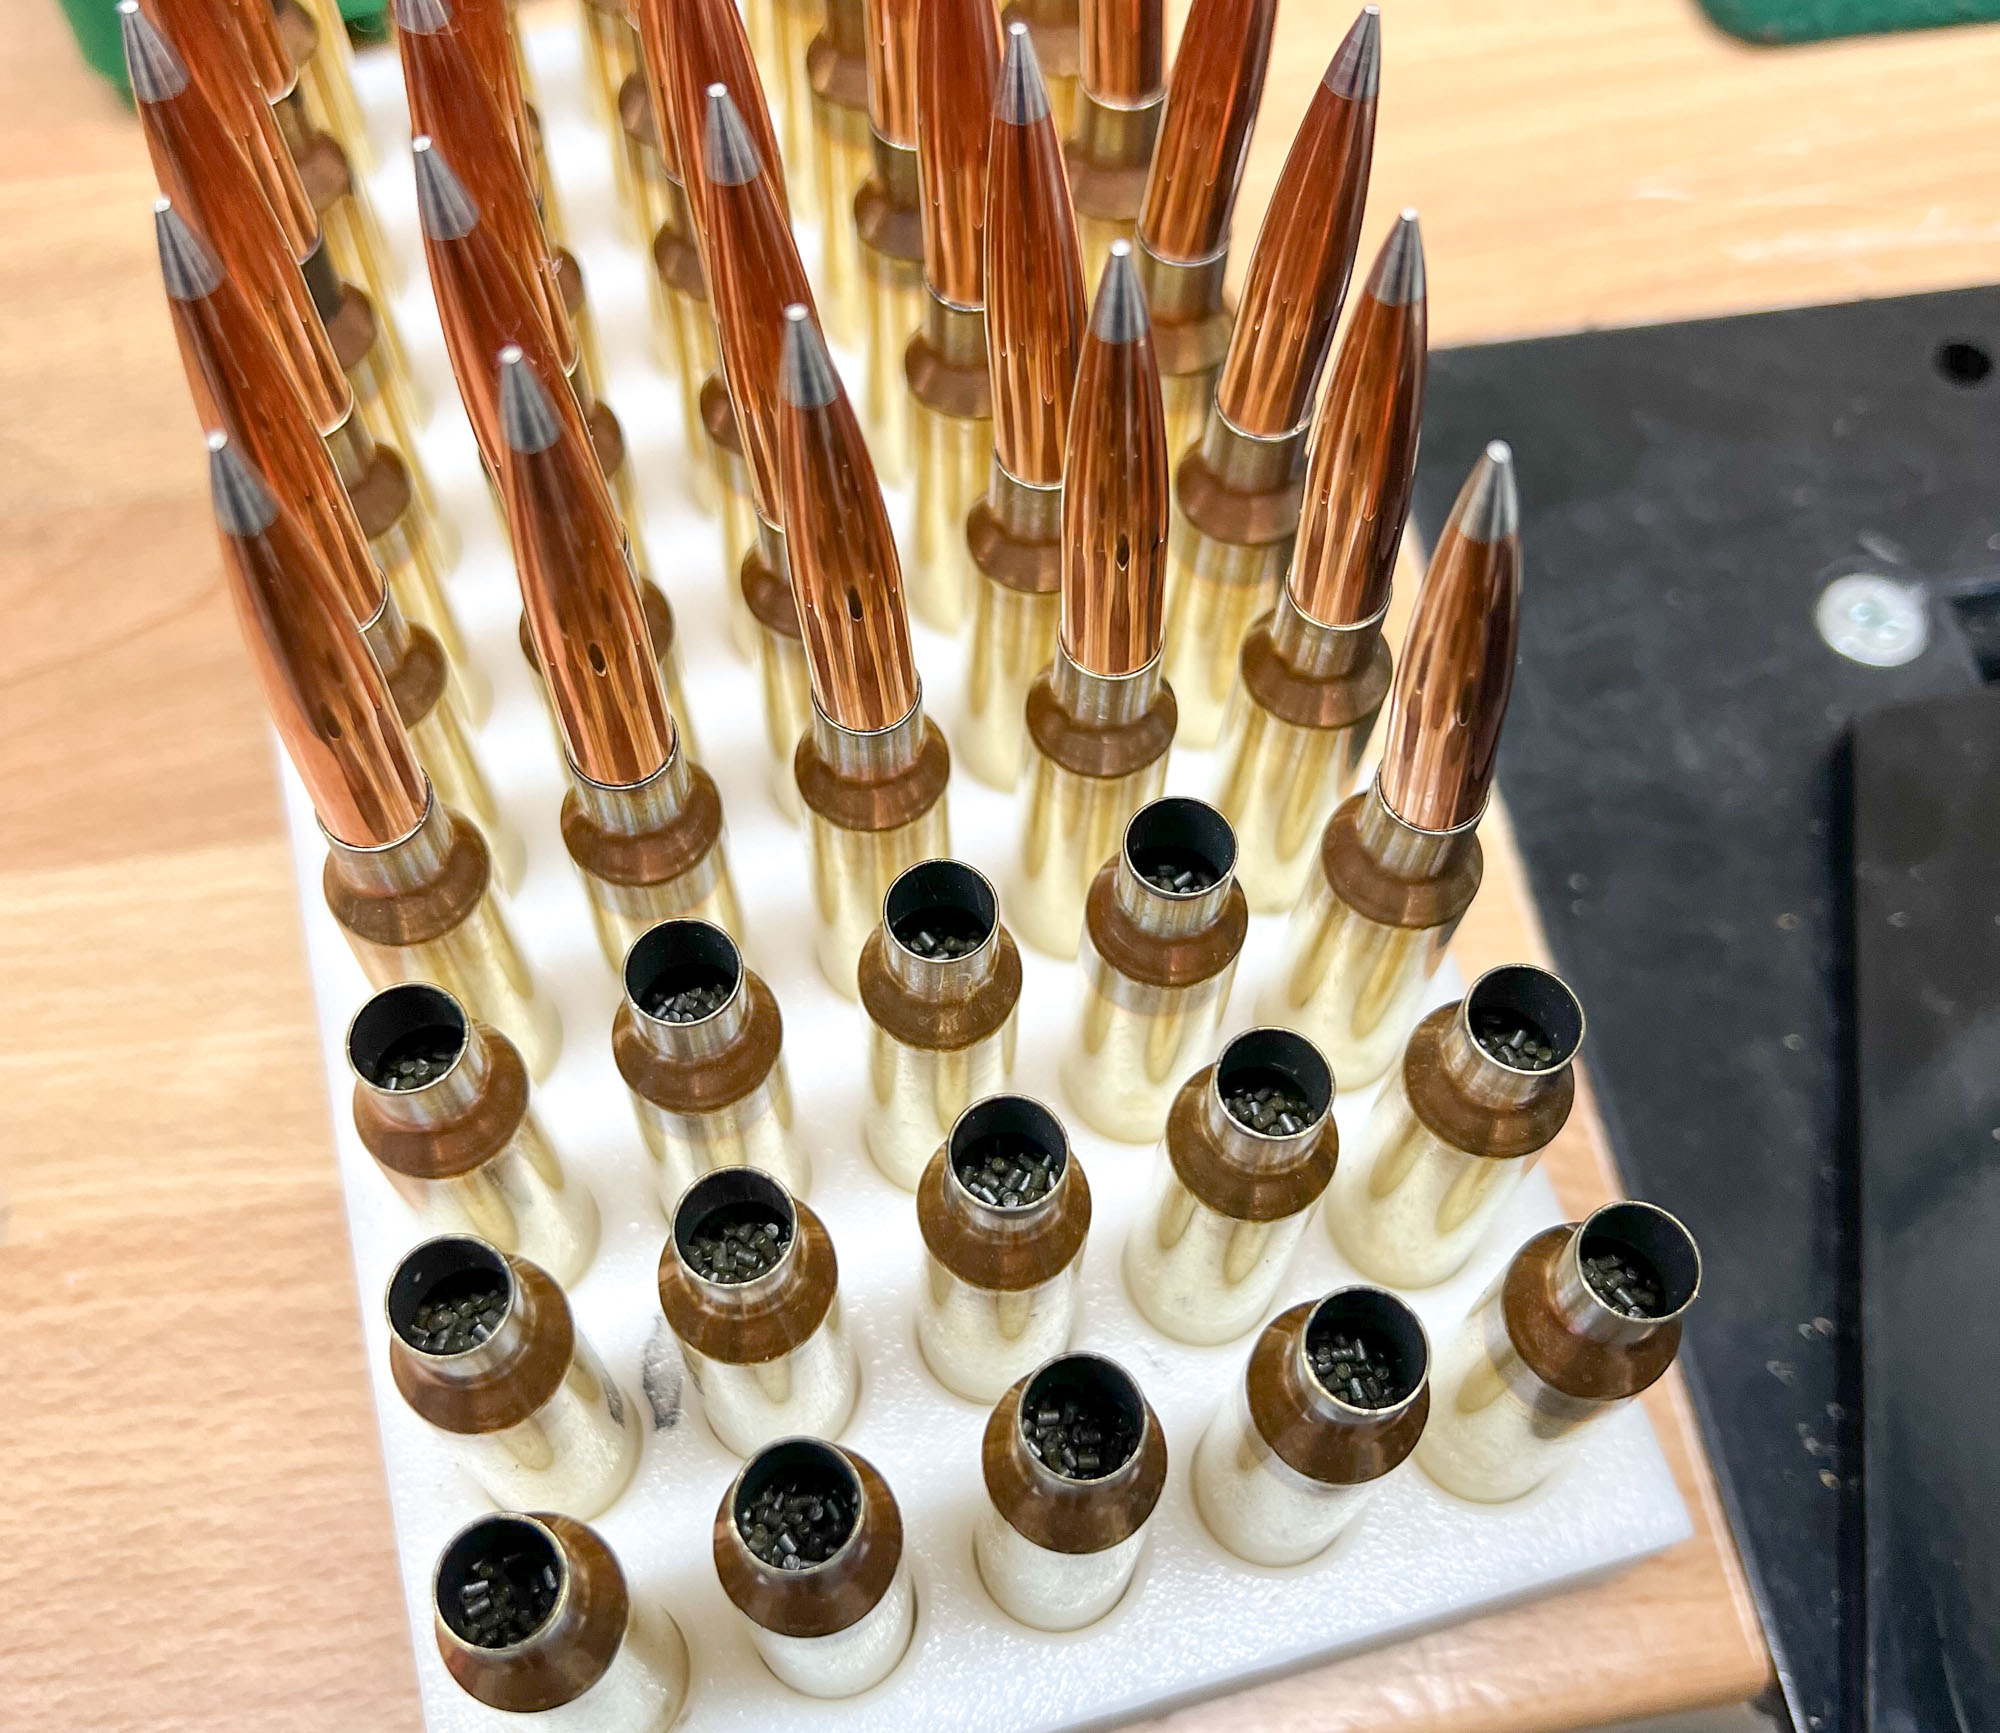 The author's match load consisted of 300 PRC brass by ADG loaded with 77.5 grains of H1000 and topped with 230-grain Hornady A-Tips.